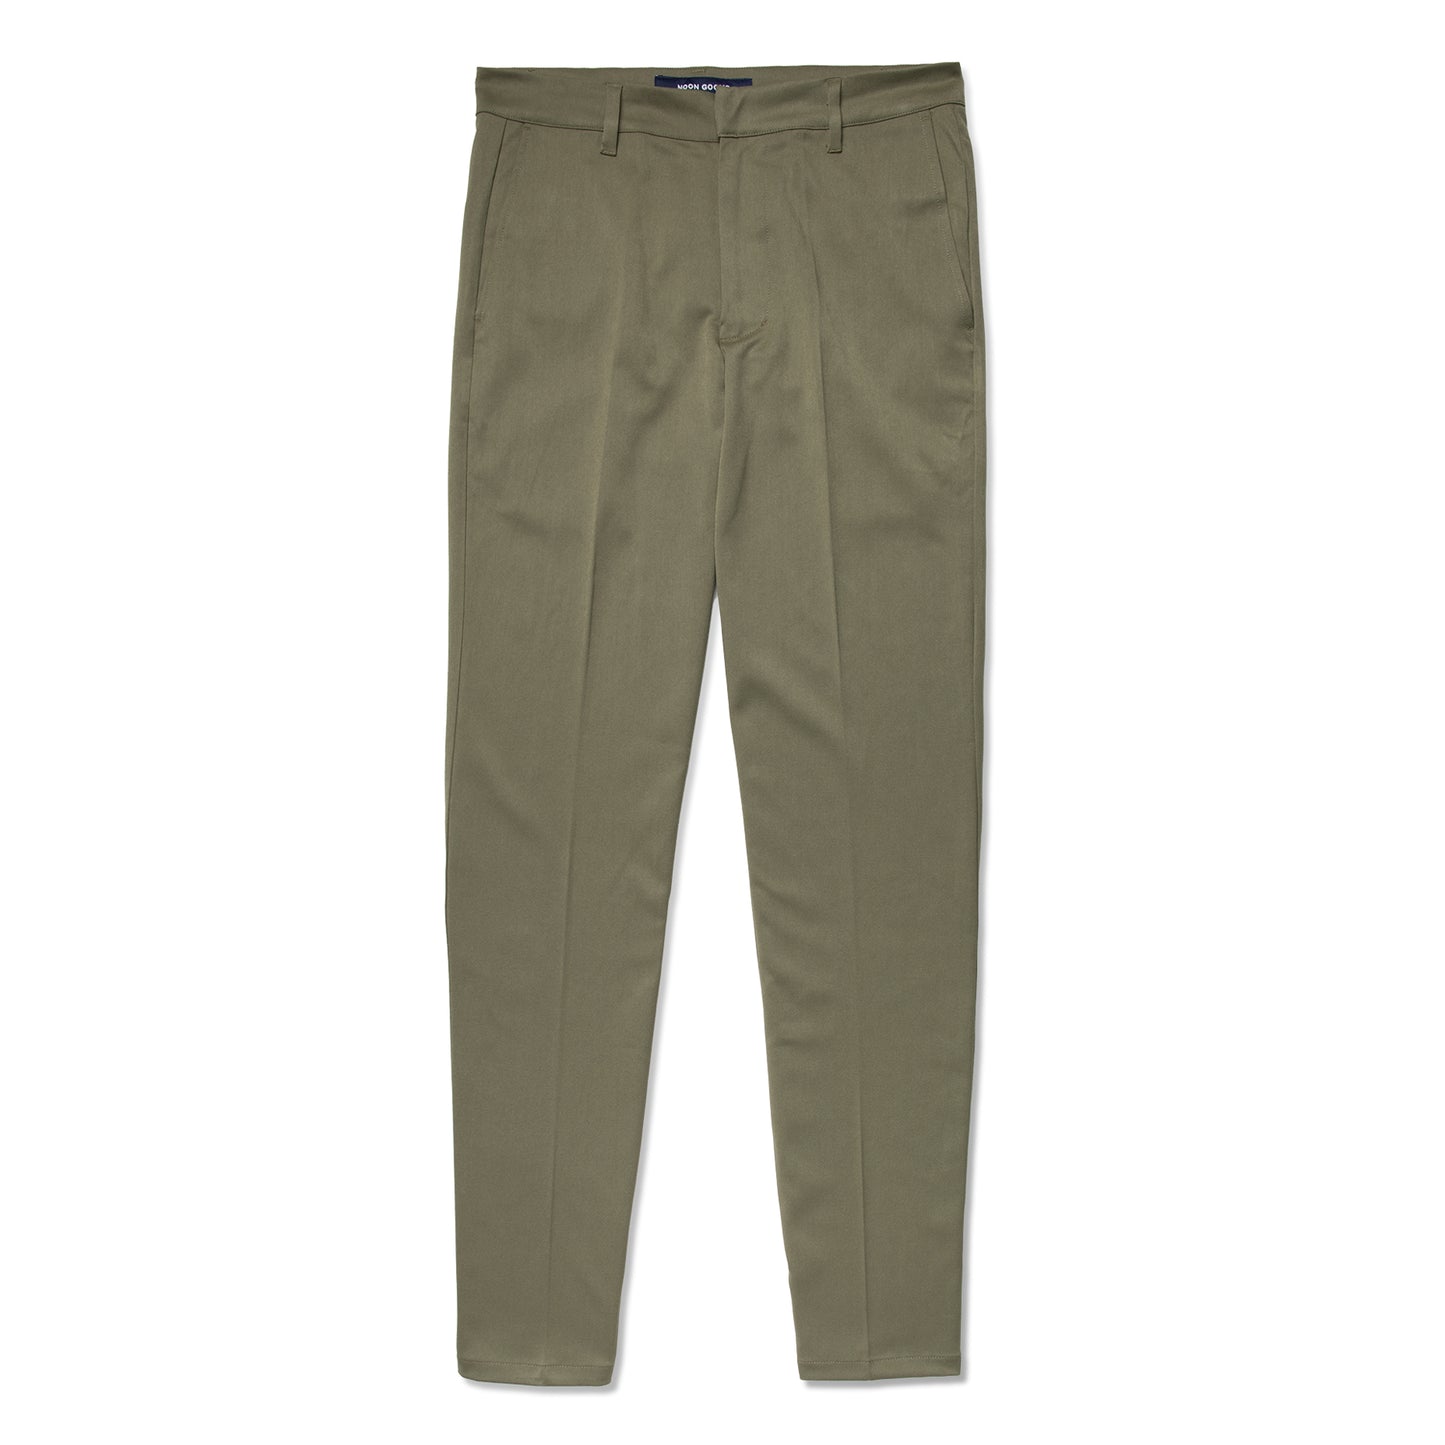 Noon Goons Ahmed Pant (Olive)